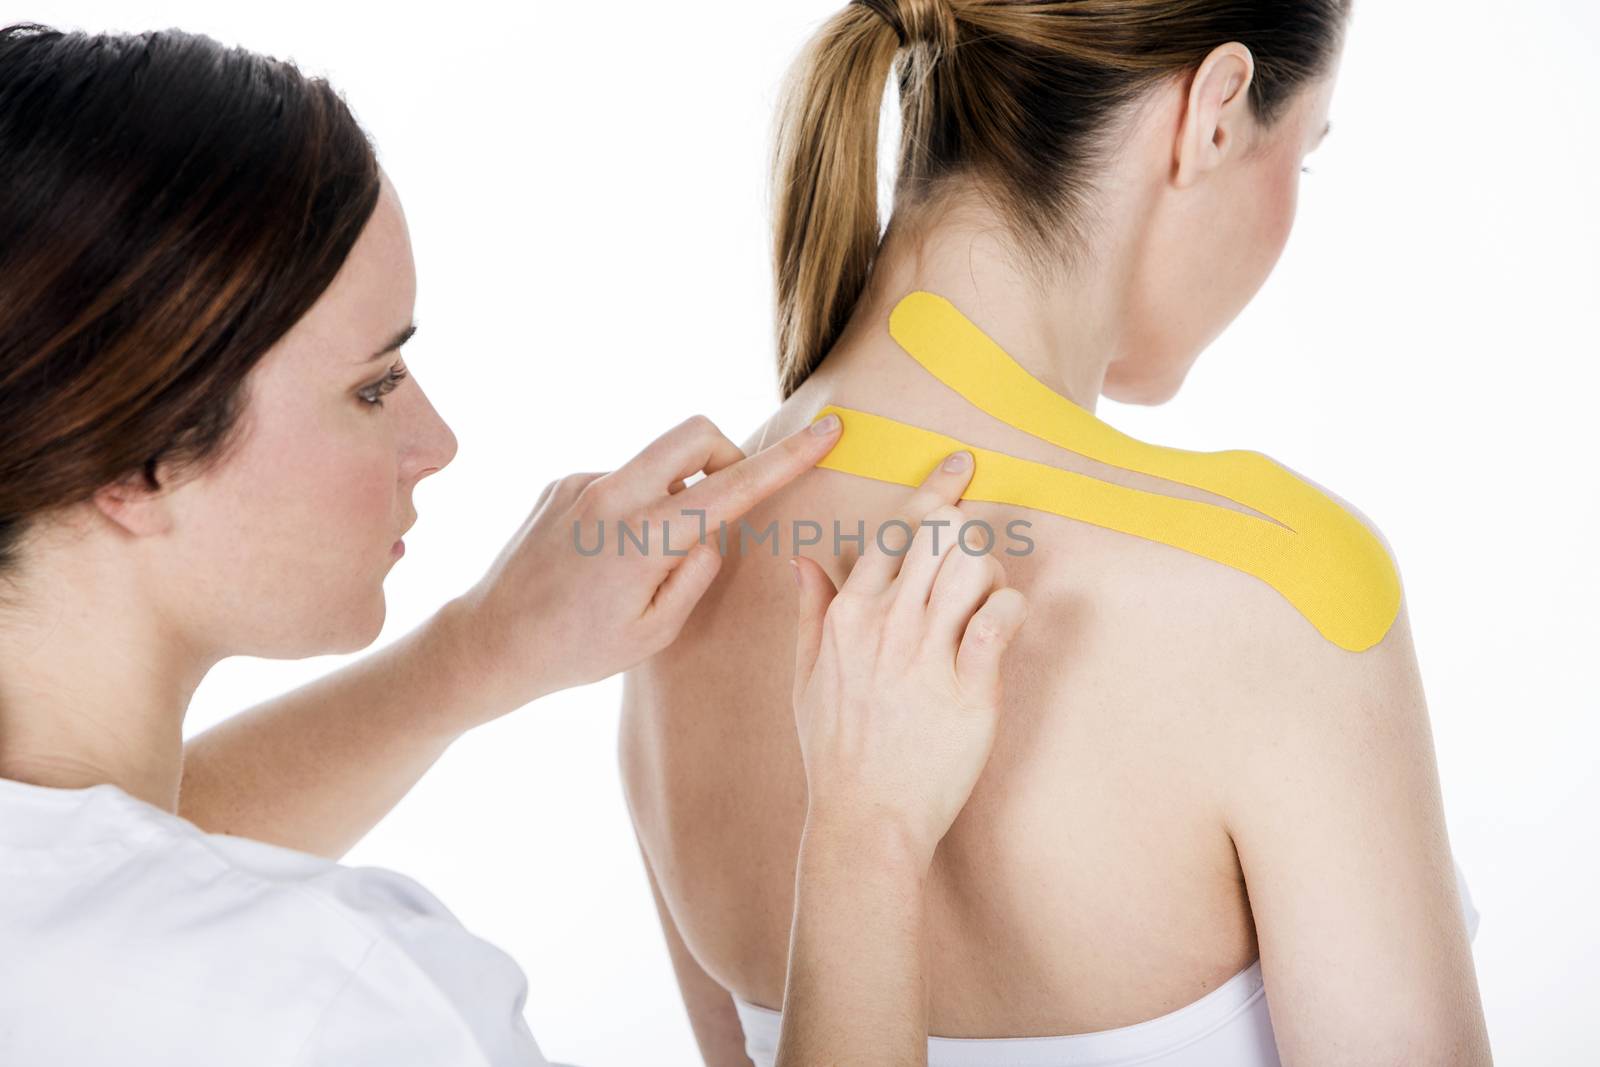 physiotherapist who puts the taping on the trapezius by Flareimage